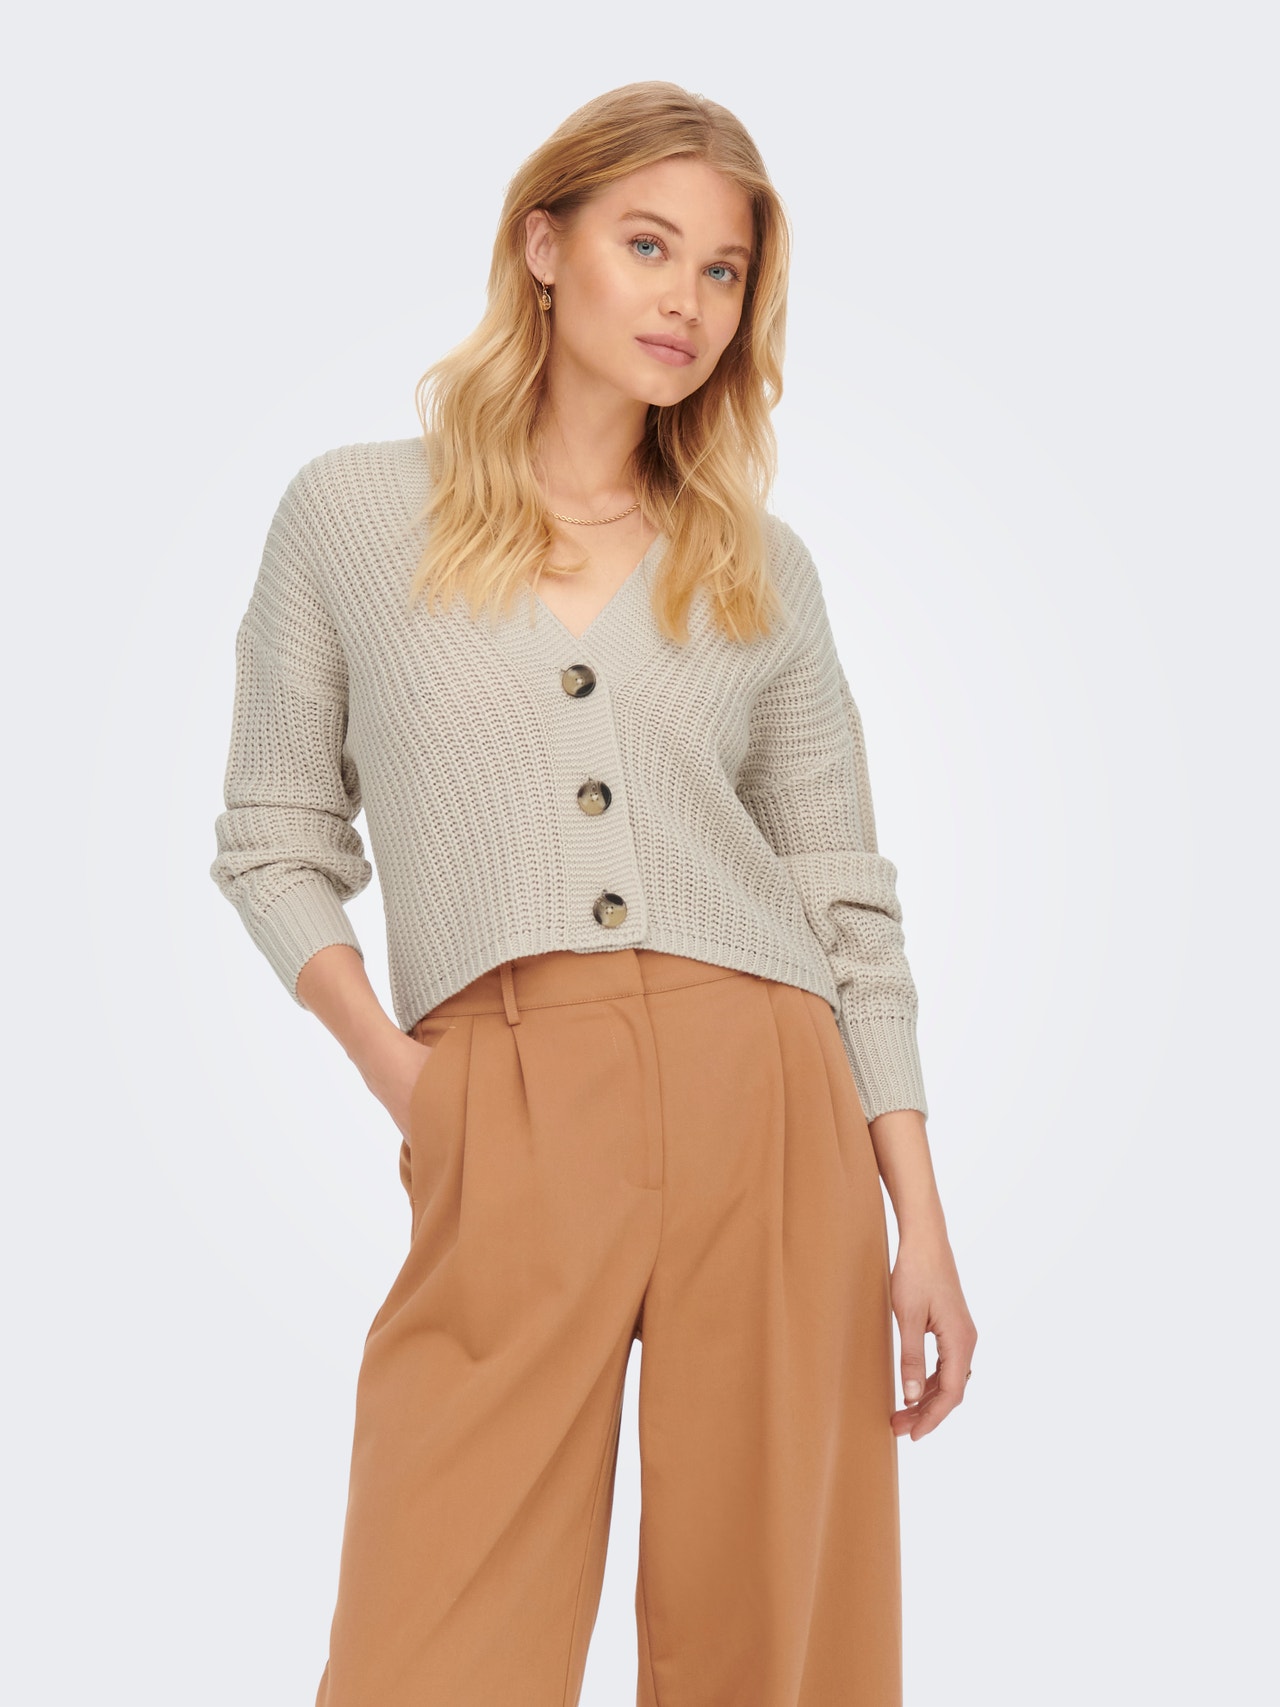 Long Sleeve Tie Waist Detail Zip Up Cropped Cardigan In Stone Knit